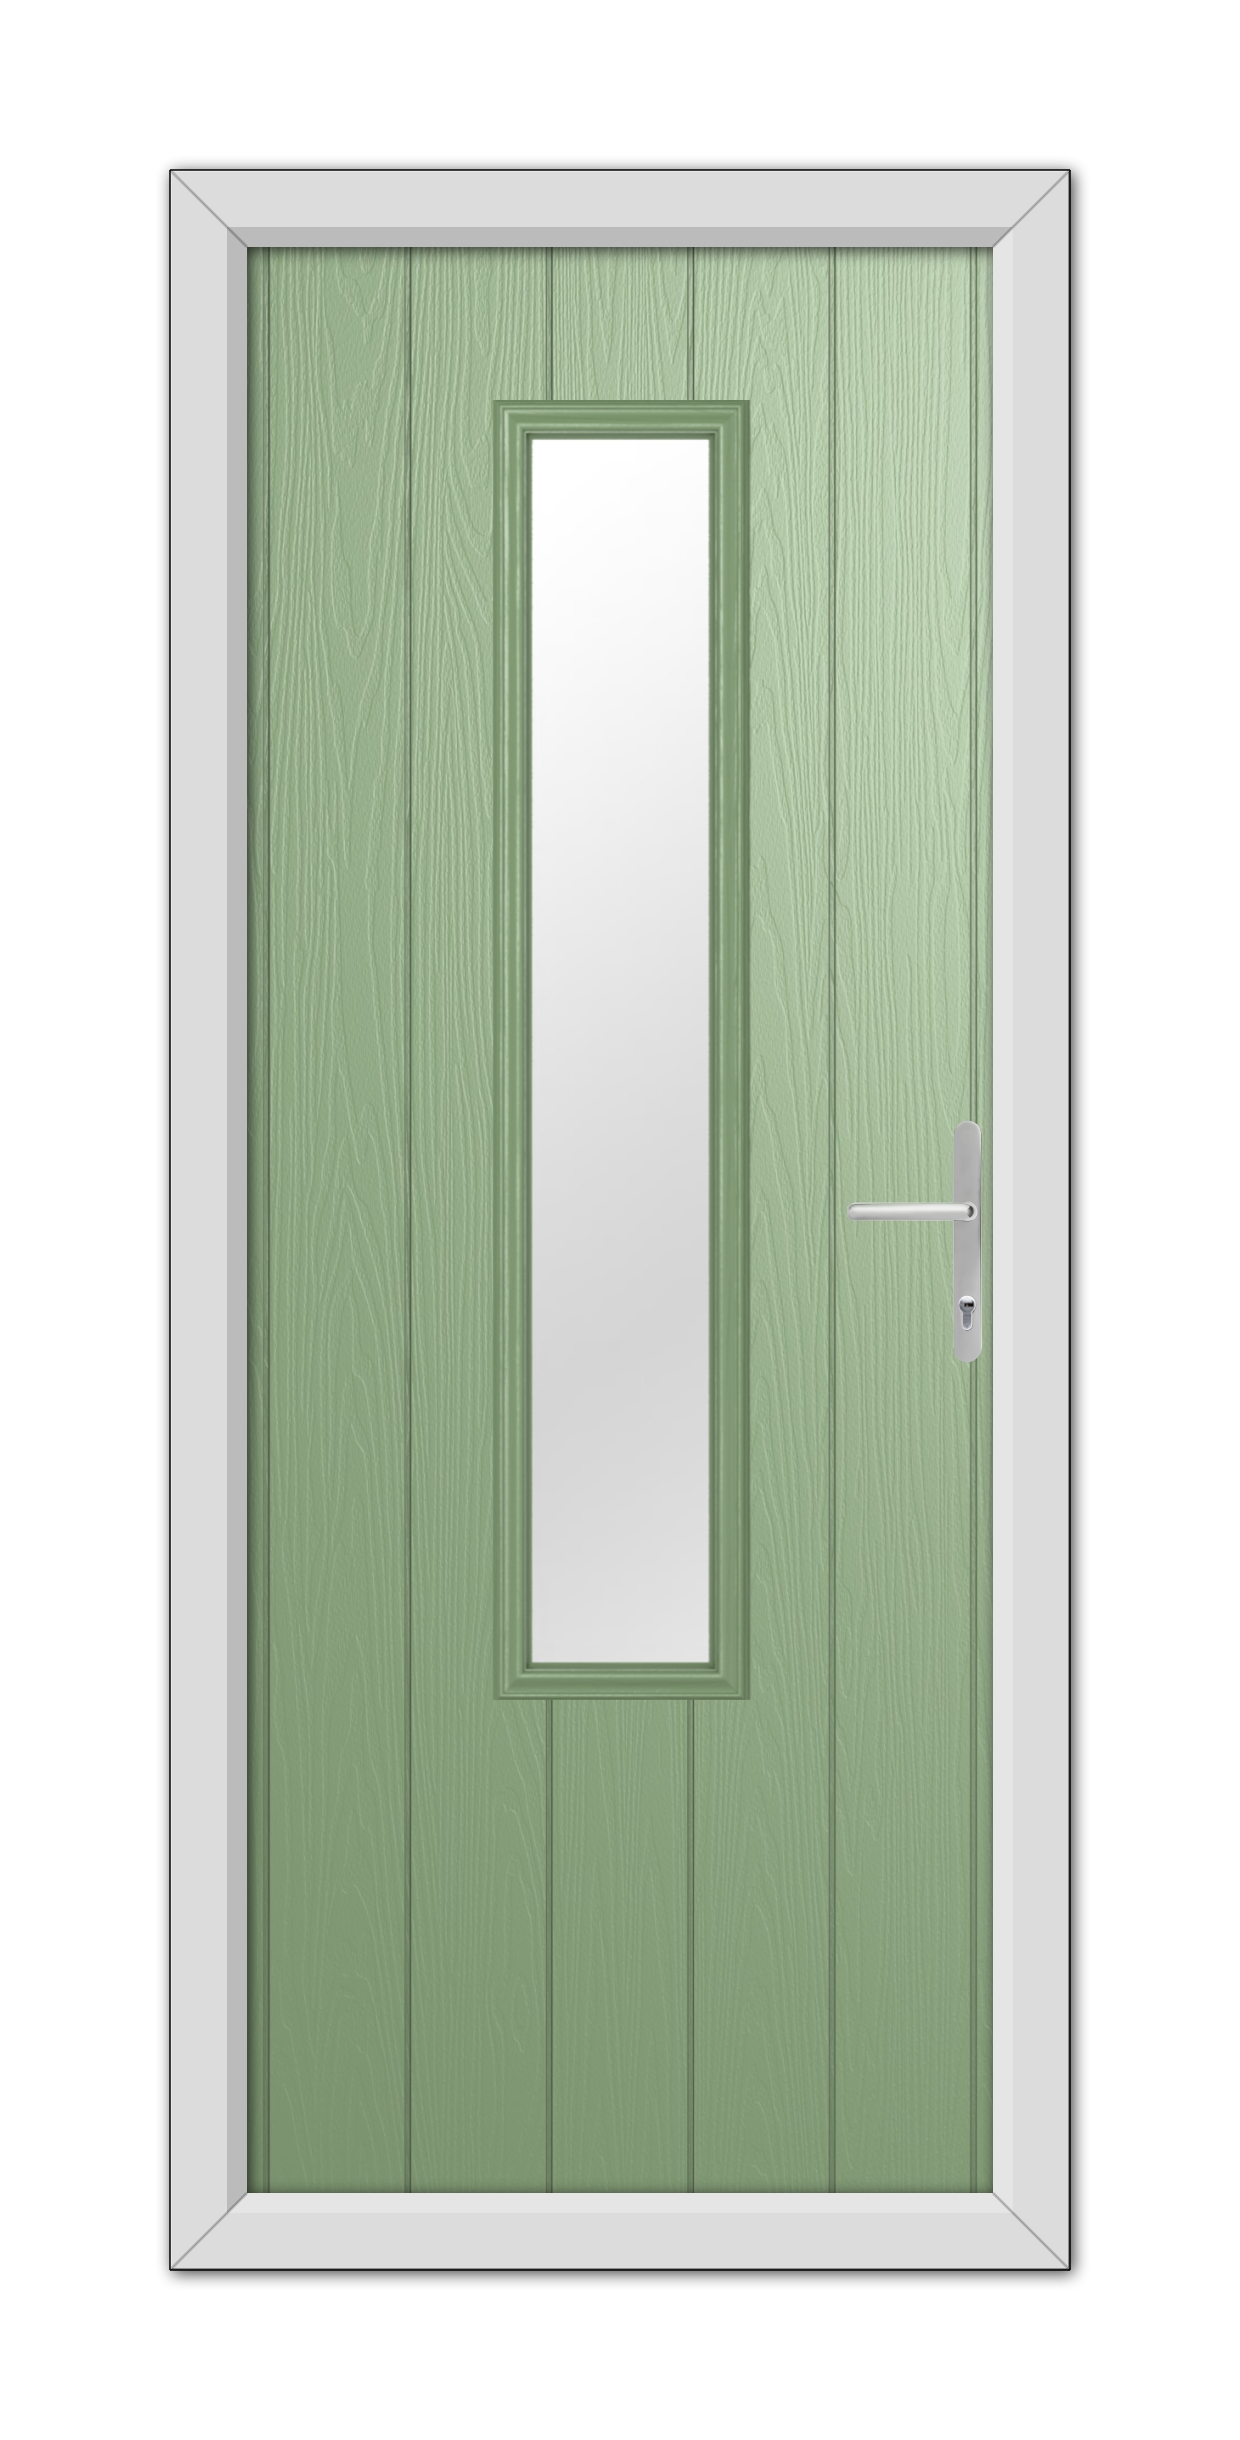 A Chartwell Green Abercorn Composite door 48mm Timber Core with a vertical glass panel and a silver handle, set within a white door frame.